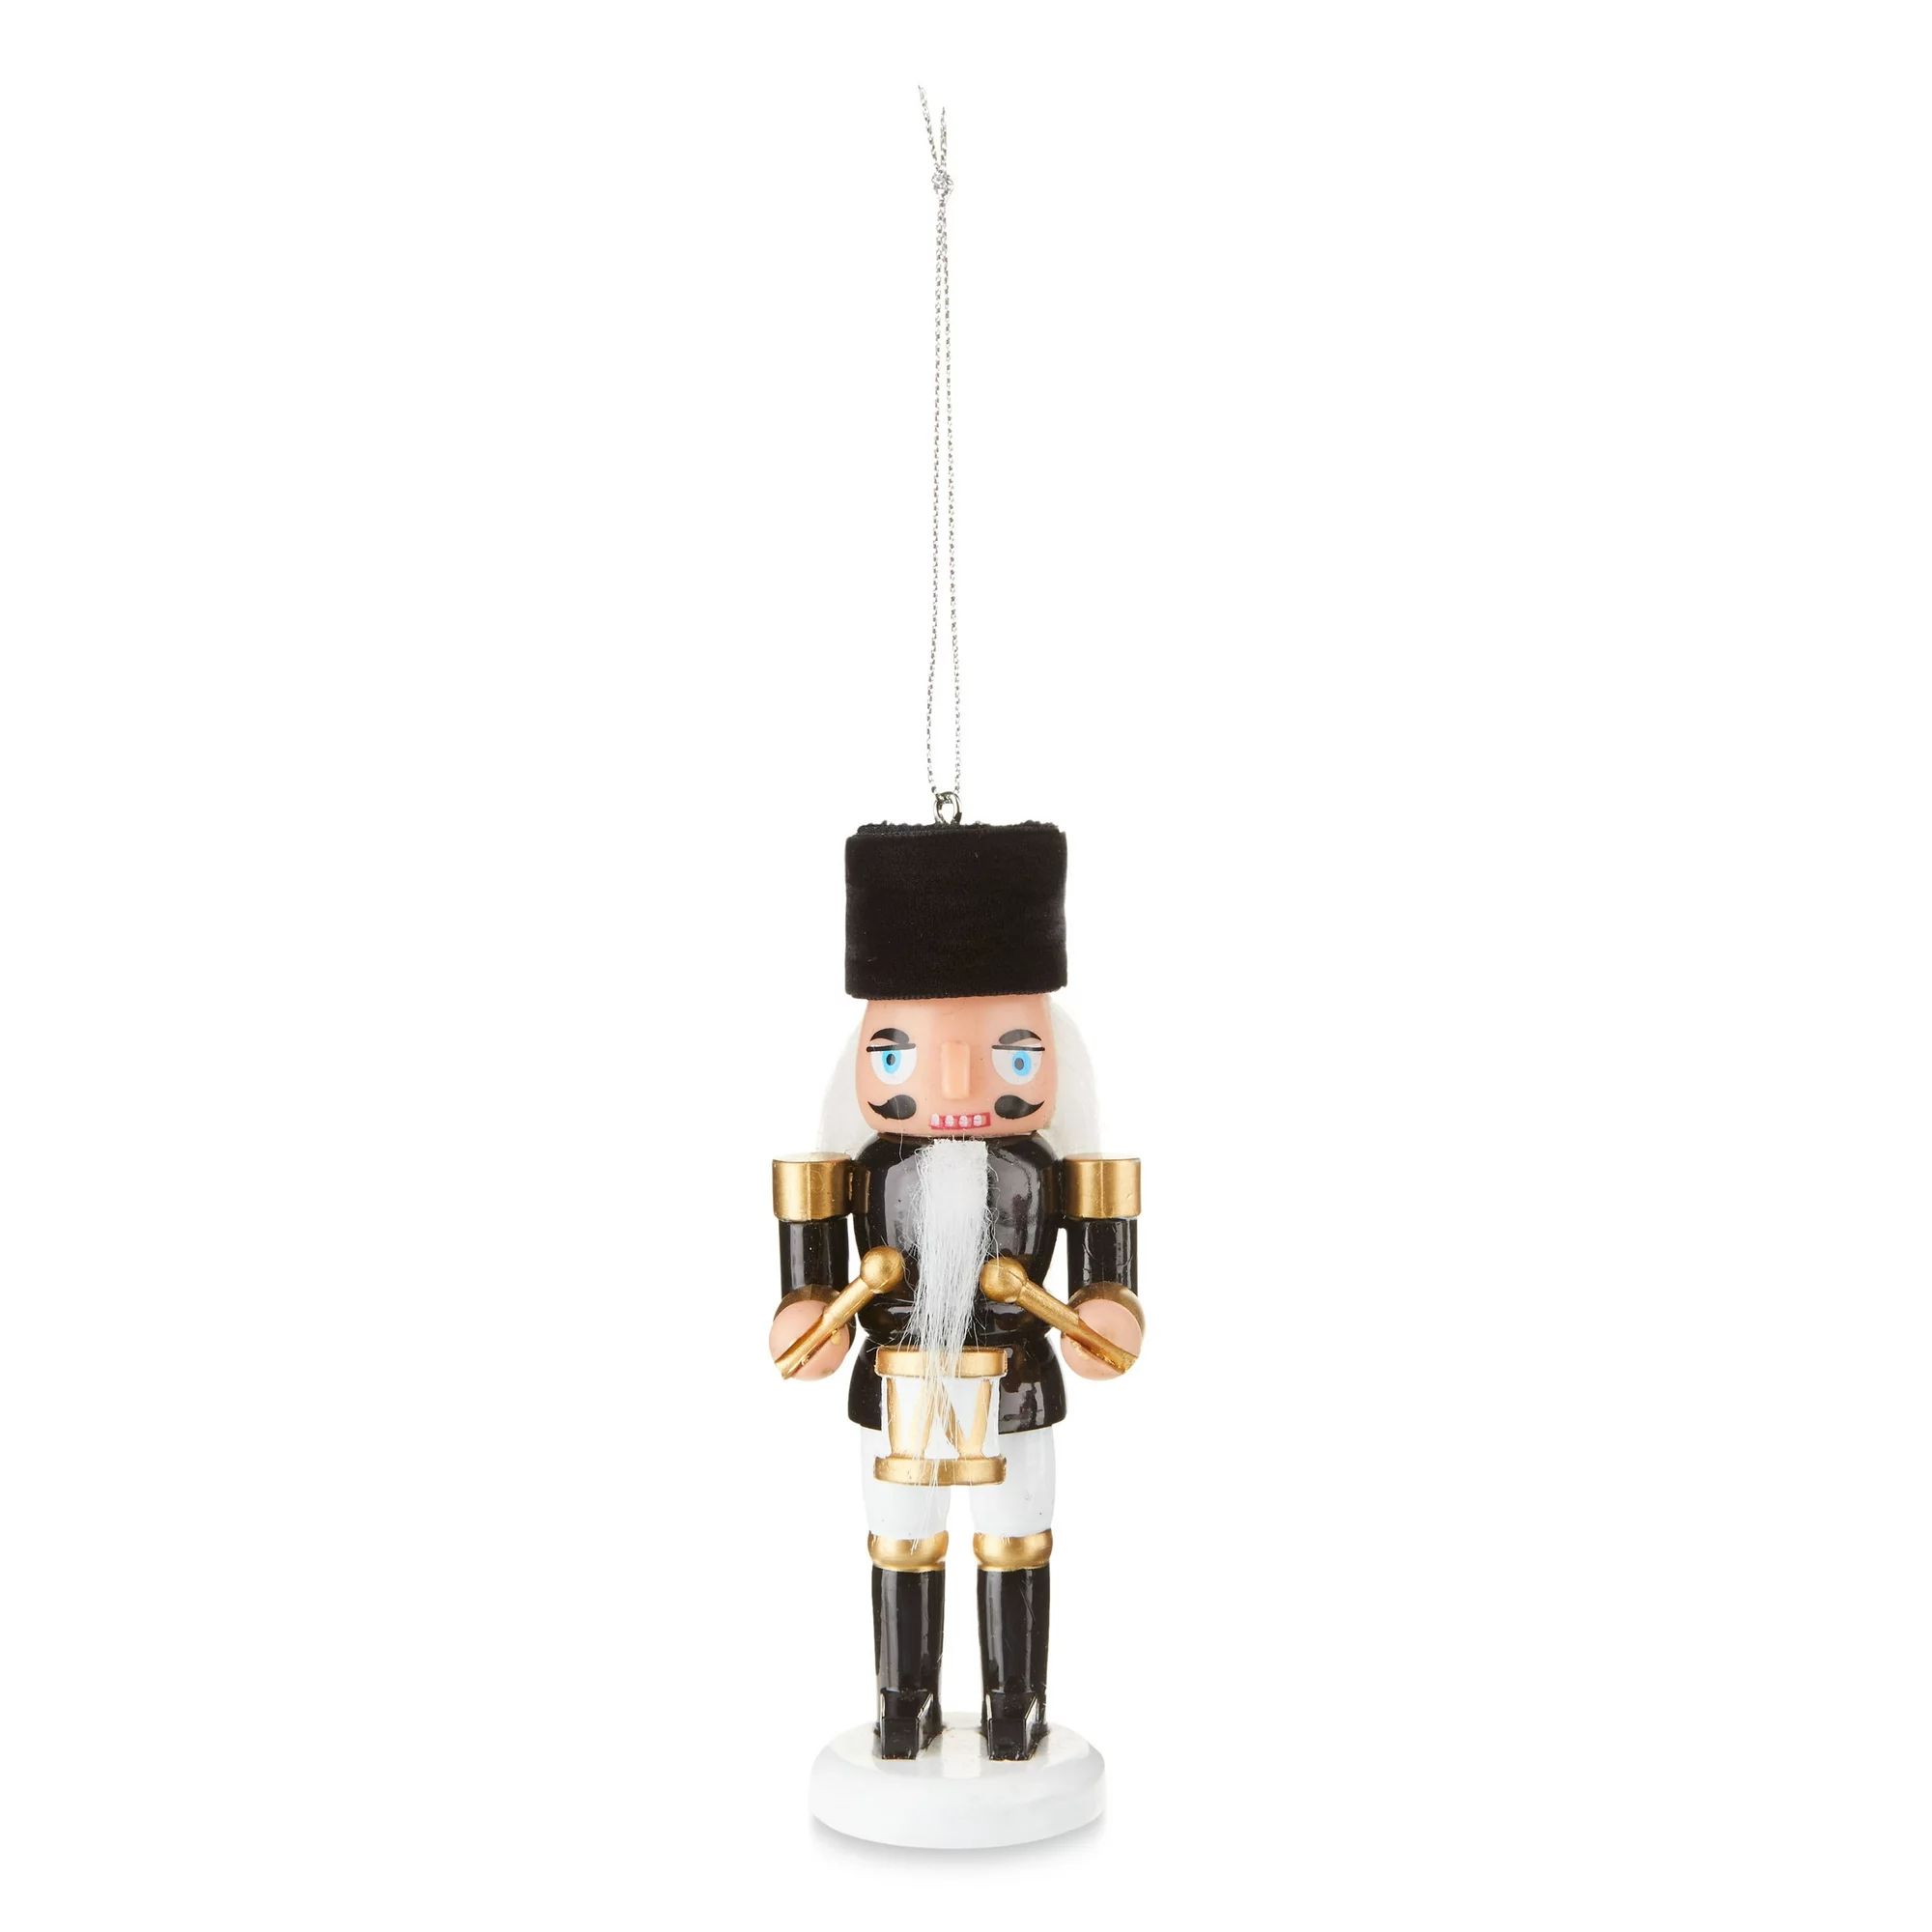 Black & Gold Nutcracker Drummer Christmas Ornament, 4.5", by Holiday Time | Walmart (US)